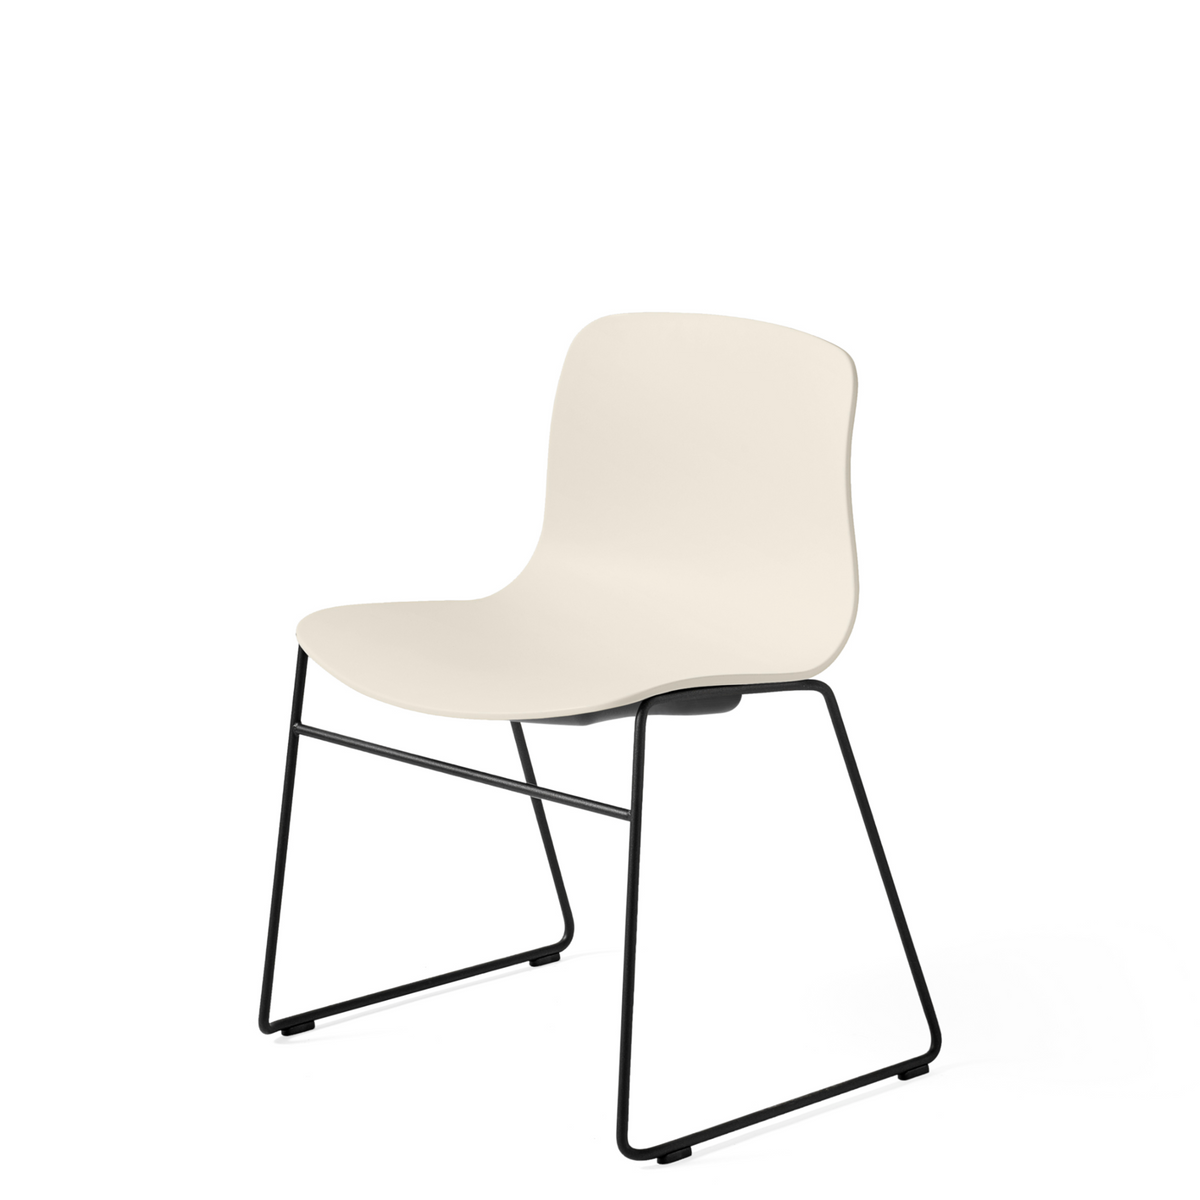 HAY About A Chair AAC 08 Cream White Stackable Chair with Black Powder Coated Base